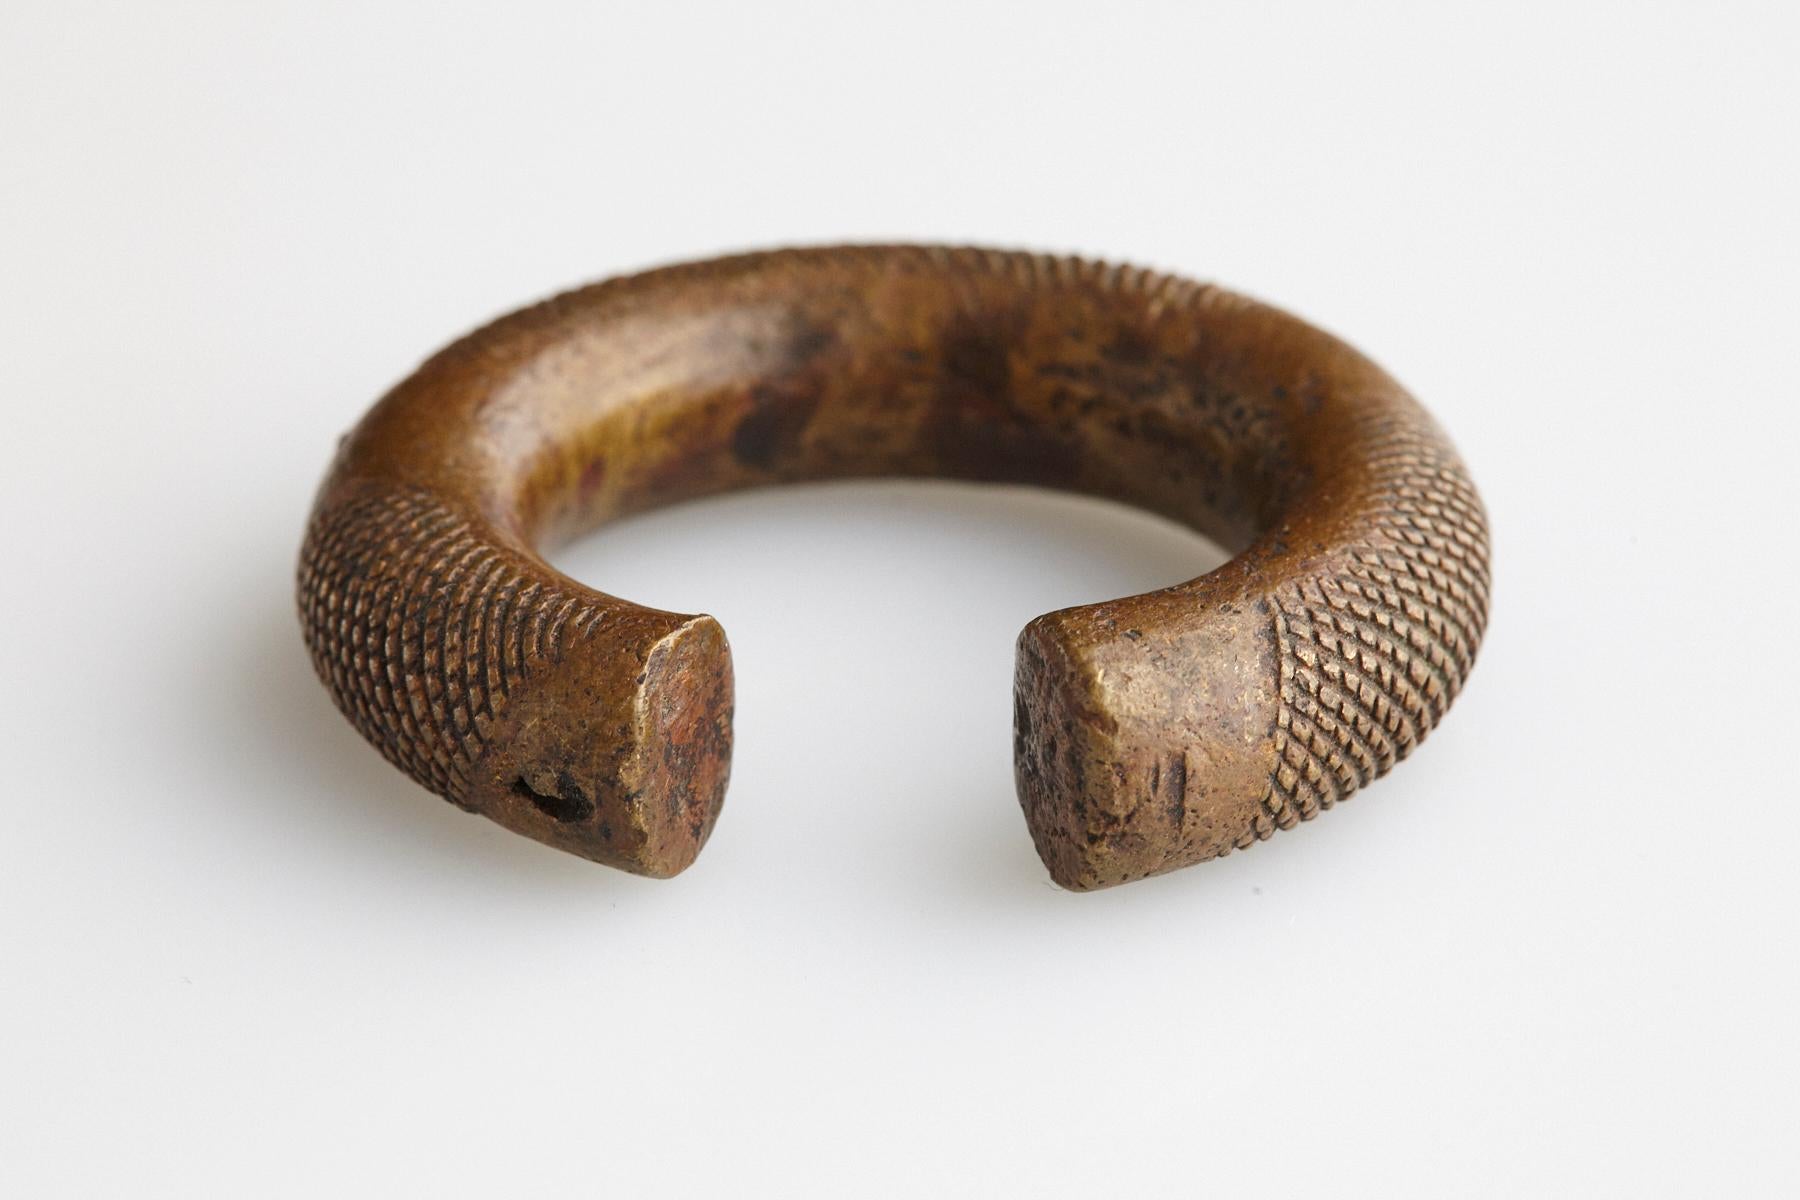 Bronze Currency Bracelet/Manilla, Dogon People, Burkina Faso, 19th c. - No 3 For Sale 1